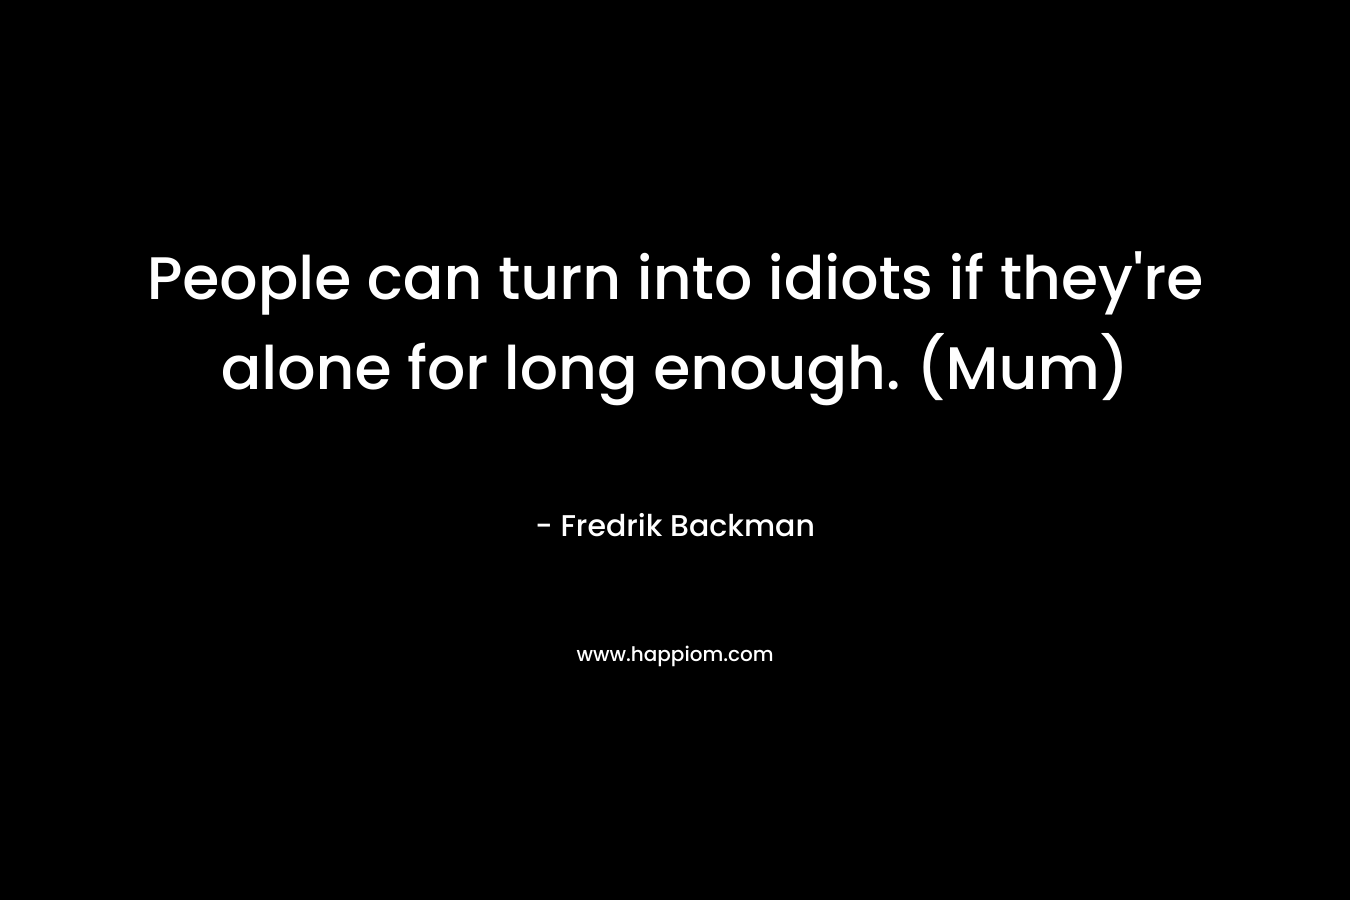 People can turn into idiots if they’re alone for long enough. (Mum) – Fredrik Backman